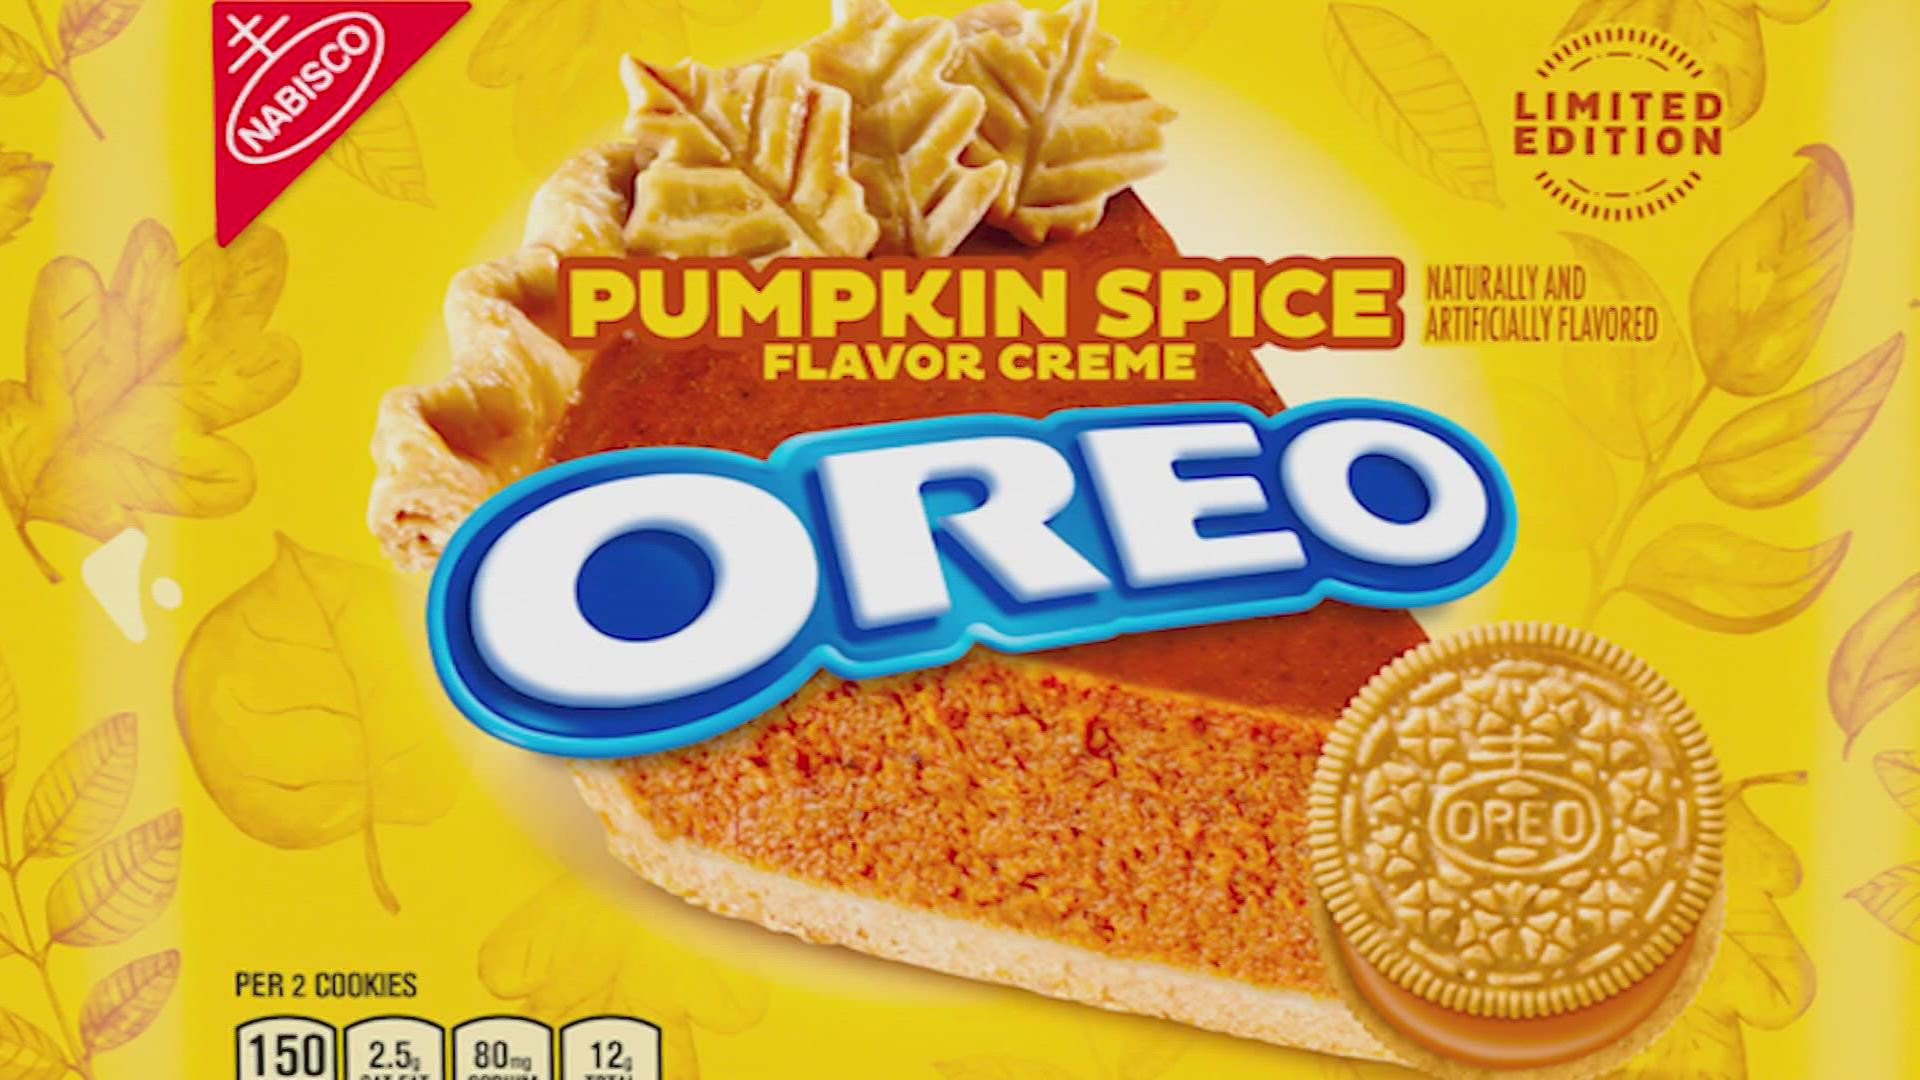 The PSLO(reo)s will be back on the shelves by mid-August, but it has our Daybreak team questioning if it's even time for Pumpkin Spice season.